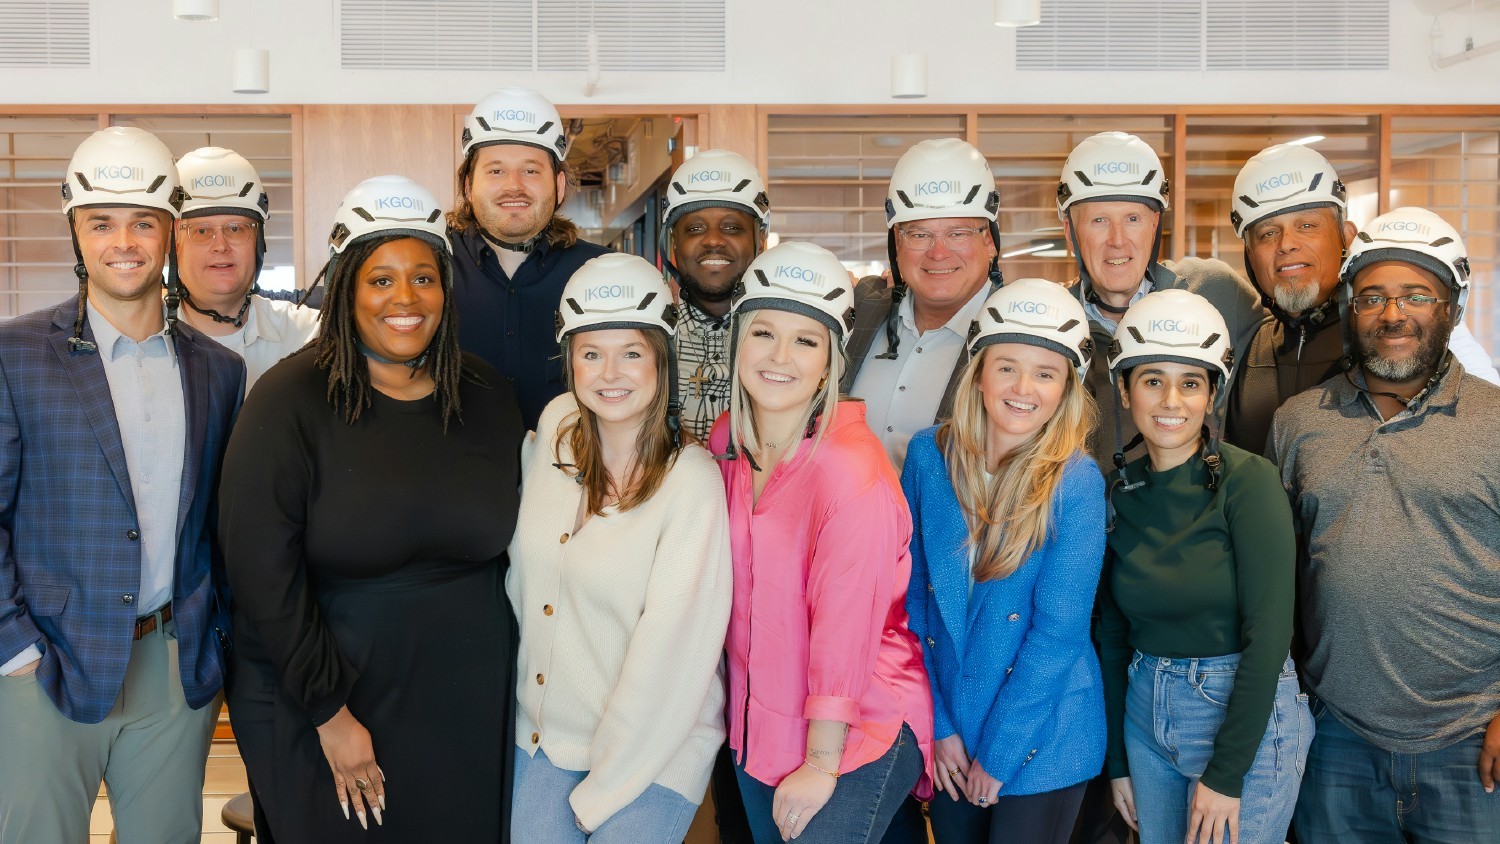 Some of our team sporting new hard hats.